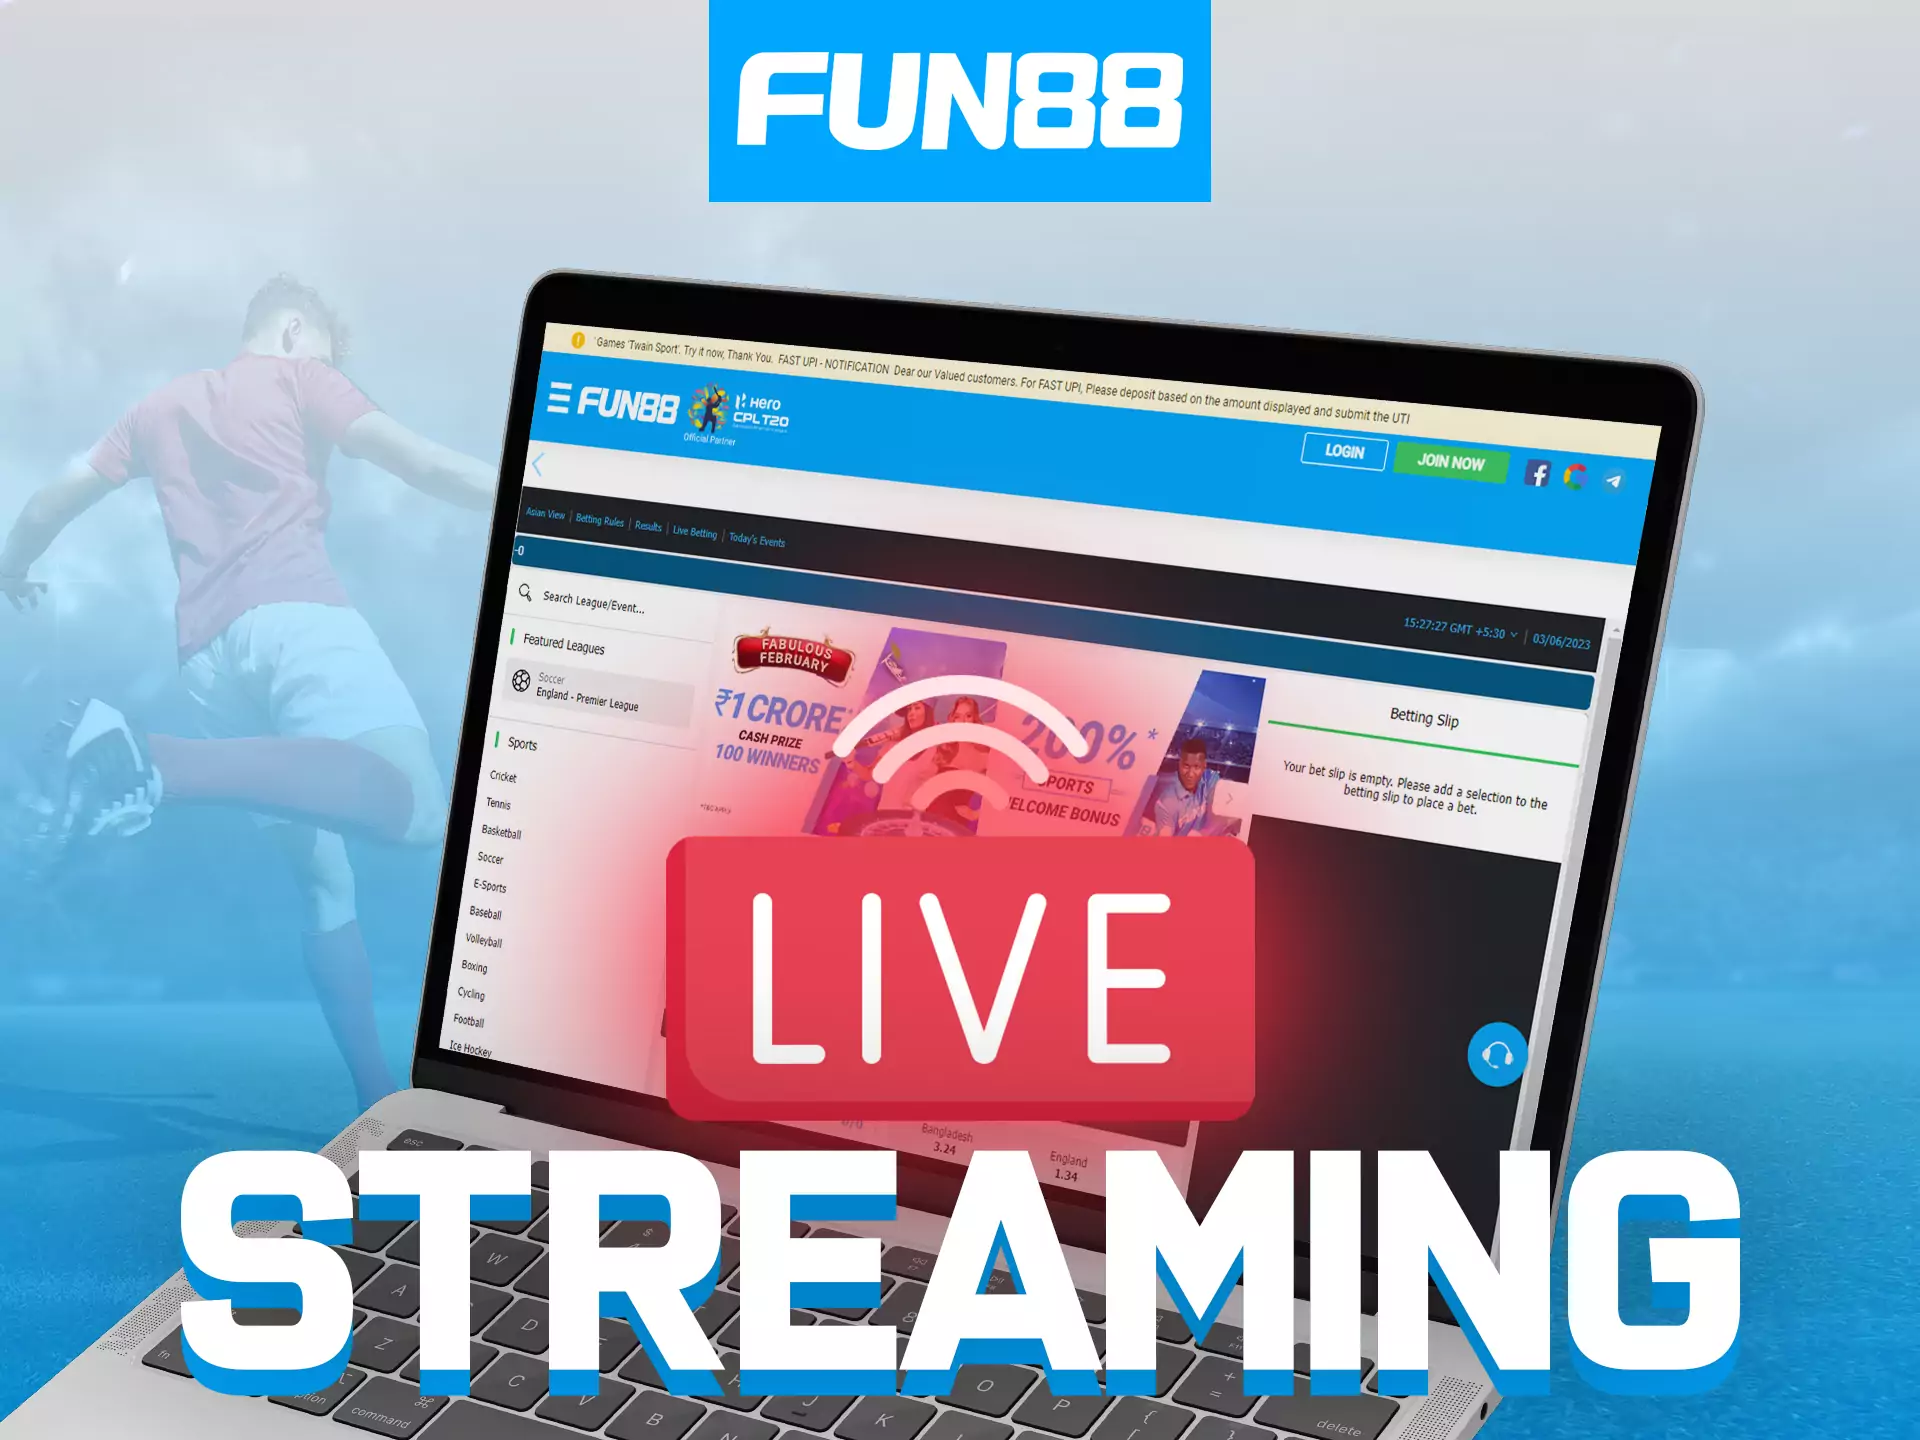 At Fun88, you can bet on sporting events while live streaming.